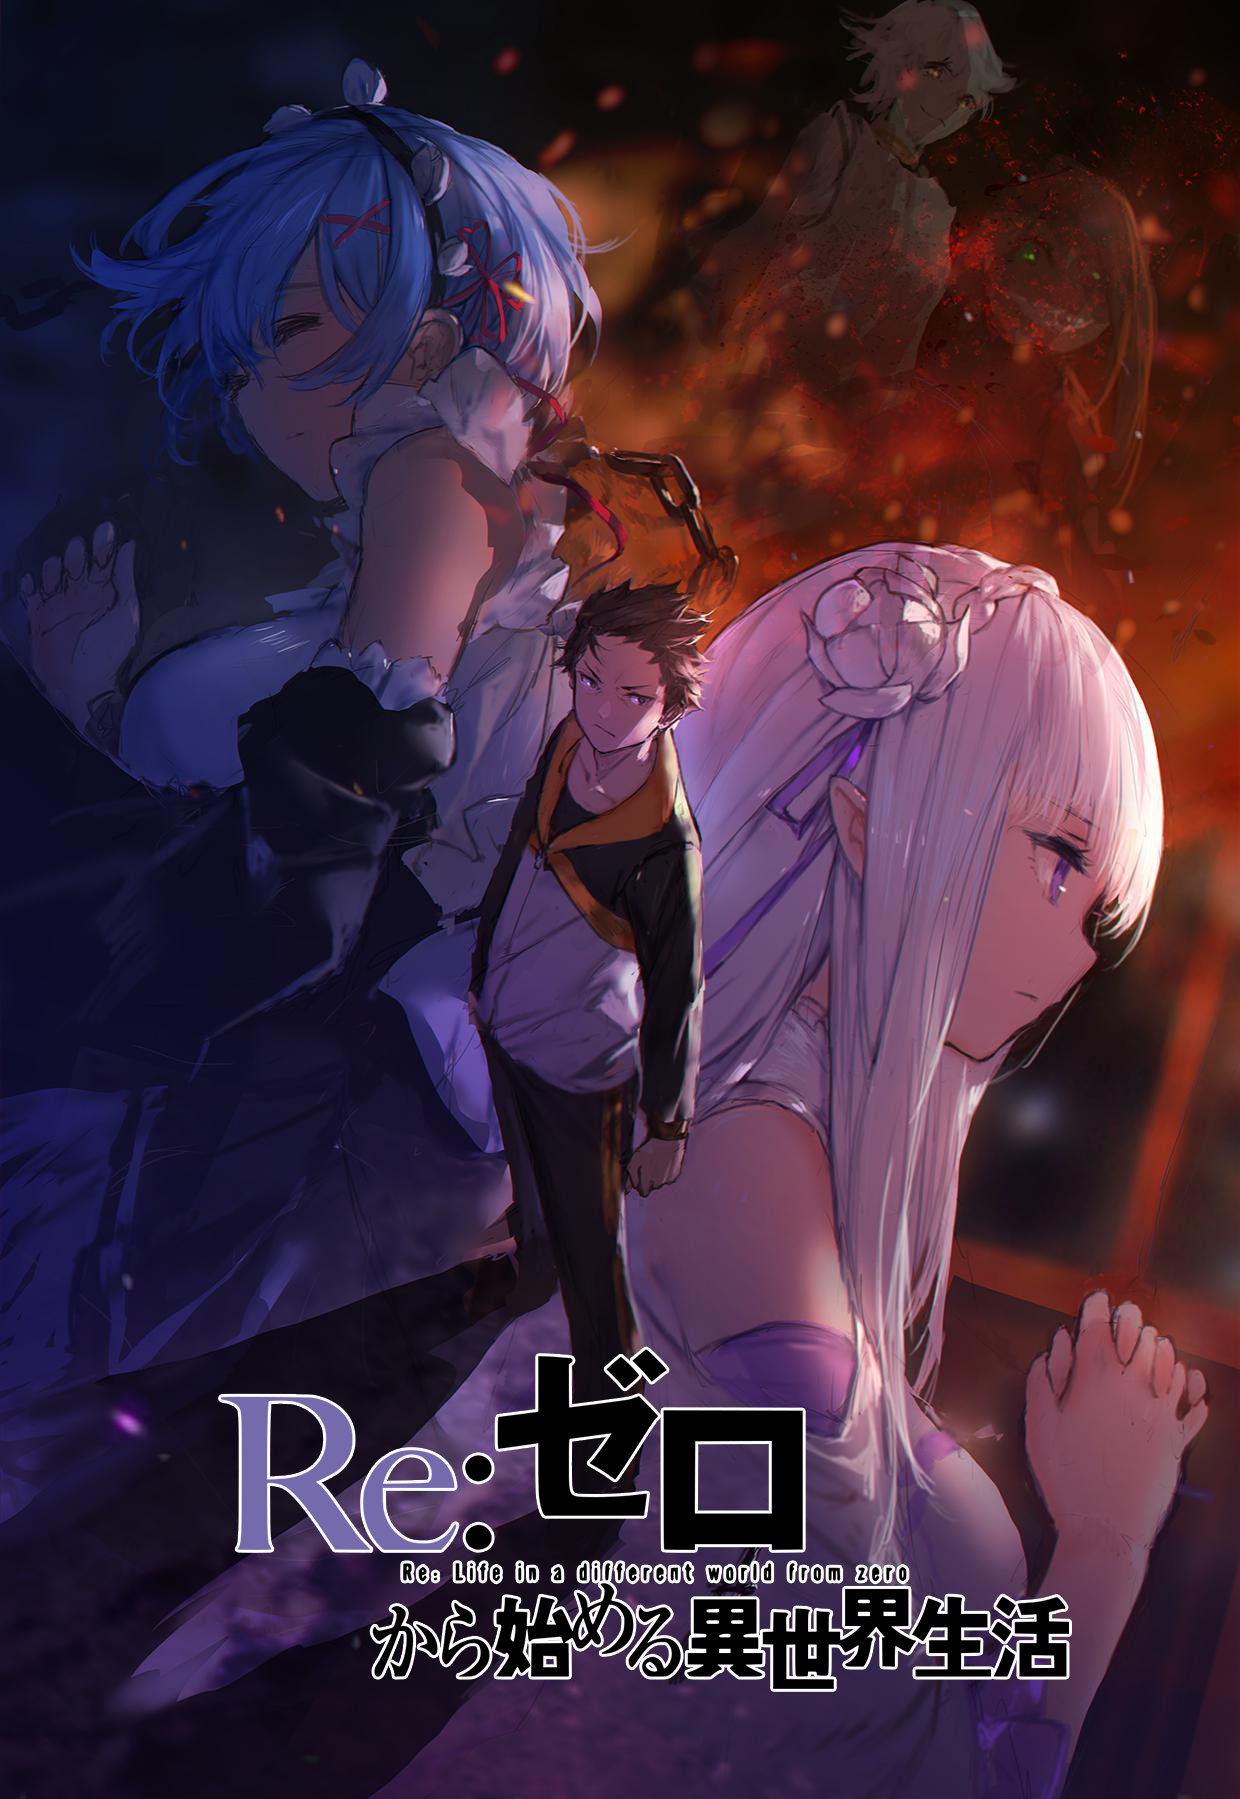 Natsuki65811820 🇲🇽 on X: Possible ReZero Season 3 incoming… Anime Japan ( 2023) announced there will be a Re:Zero Panel in the upcoming  event.🤞🏼🙏🏼 (Will it be another figure or game announcement? Or